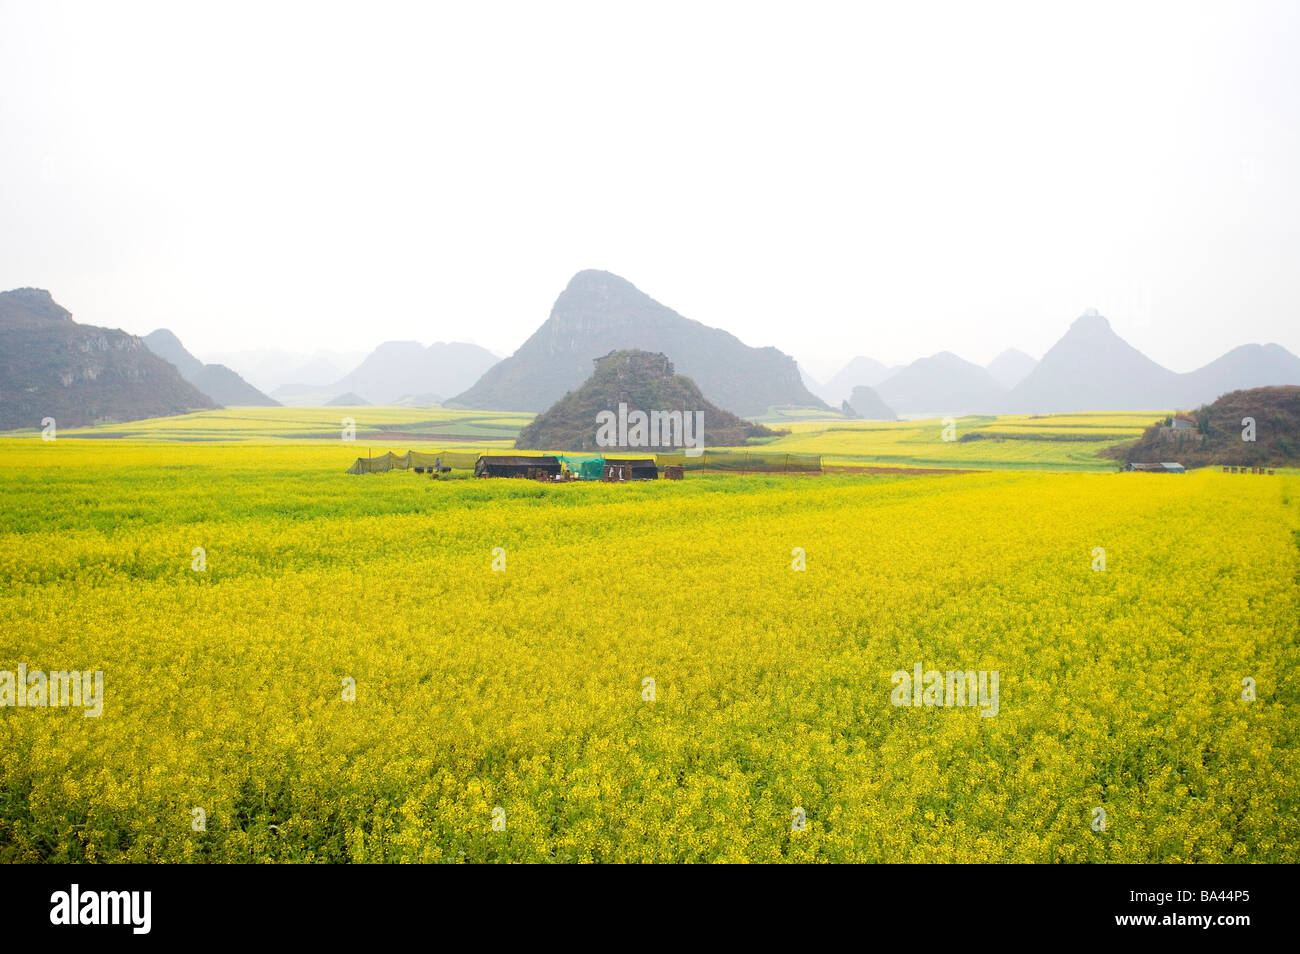 China Yunnan Province Luoping County Scenery Stock Photo